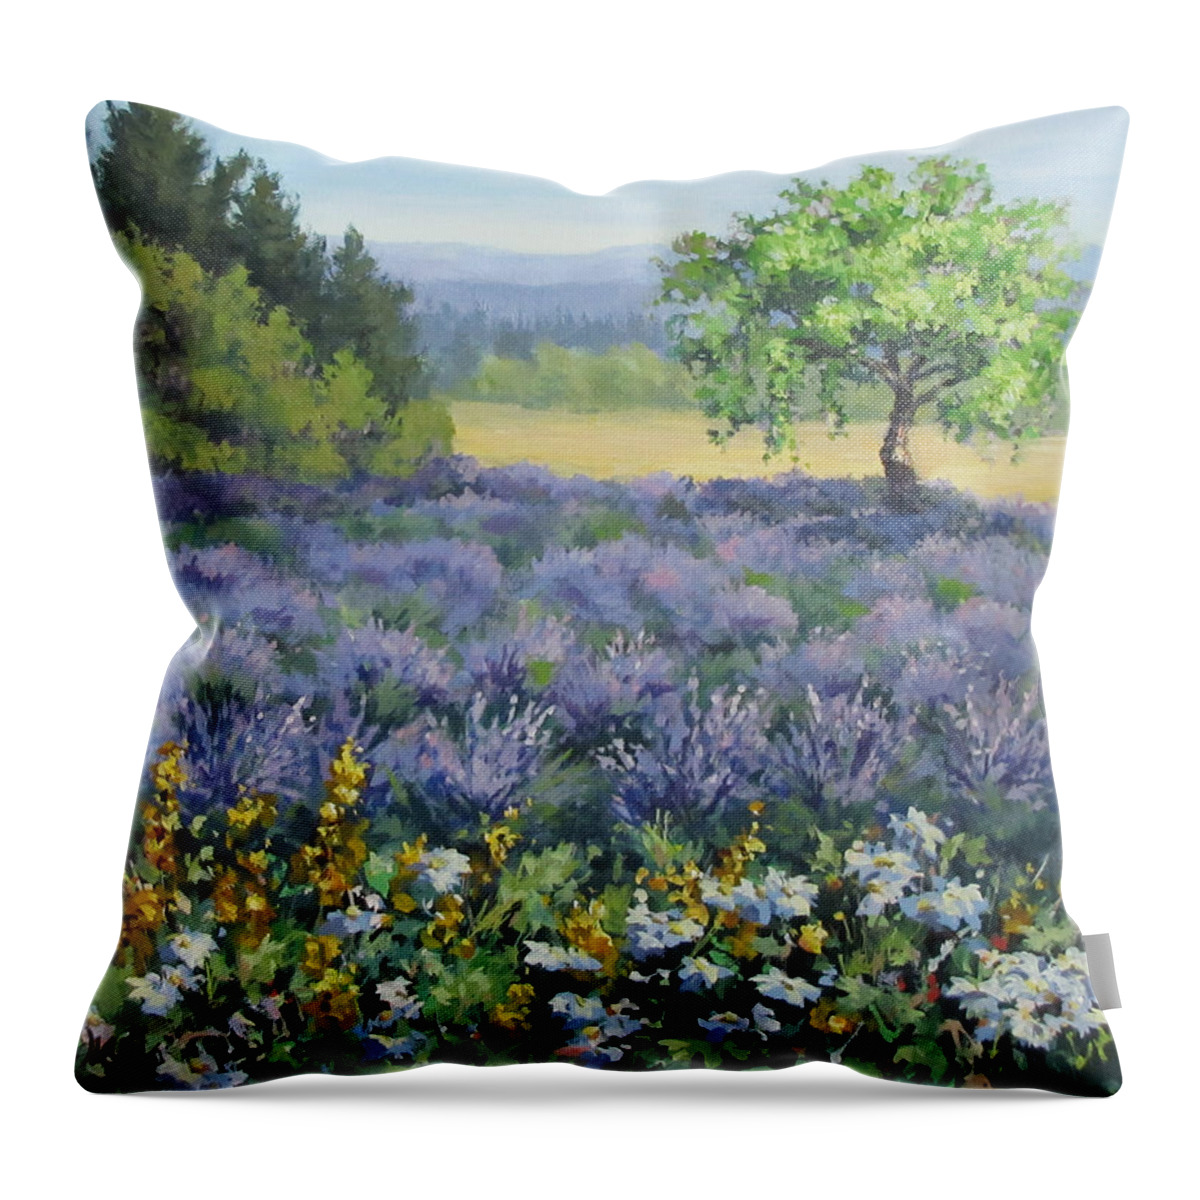 Landscape Painting Throw Pillow featuring the painting Lavender and Wildflowers by Karen Ilari